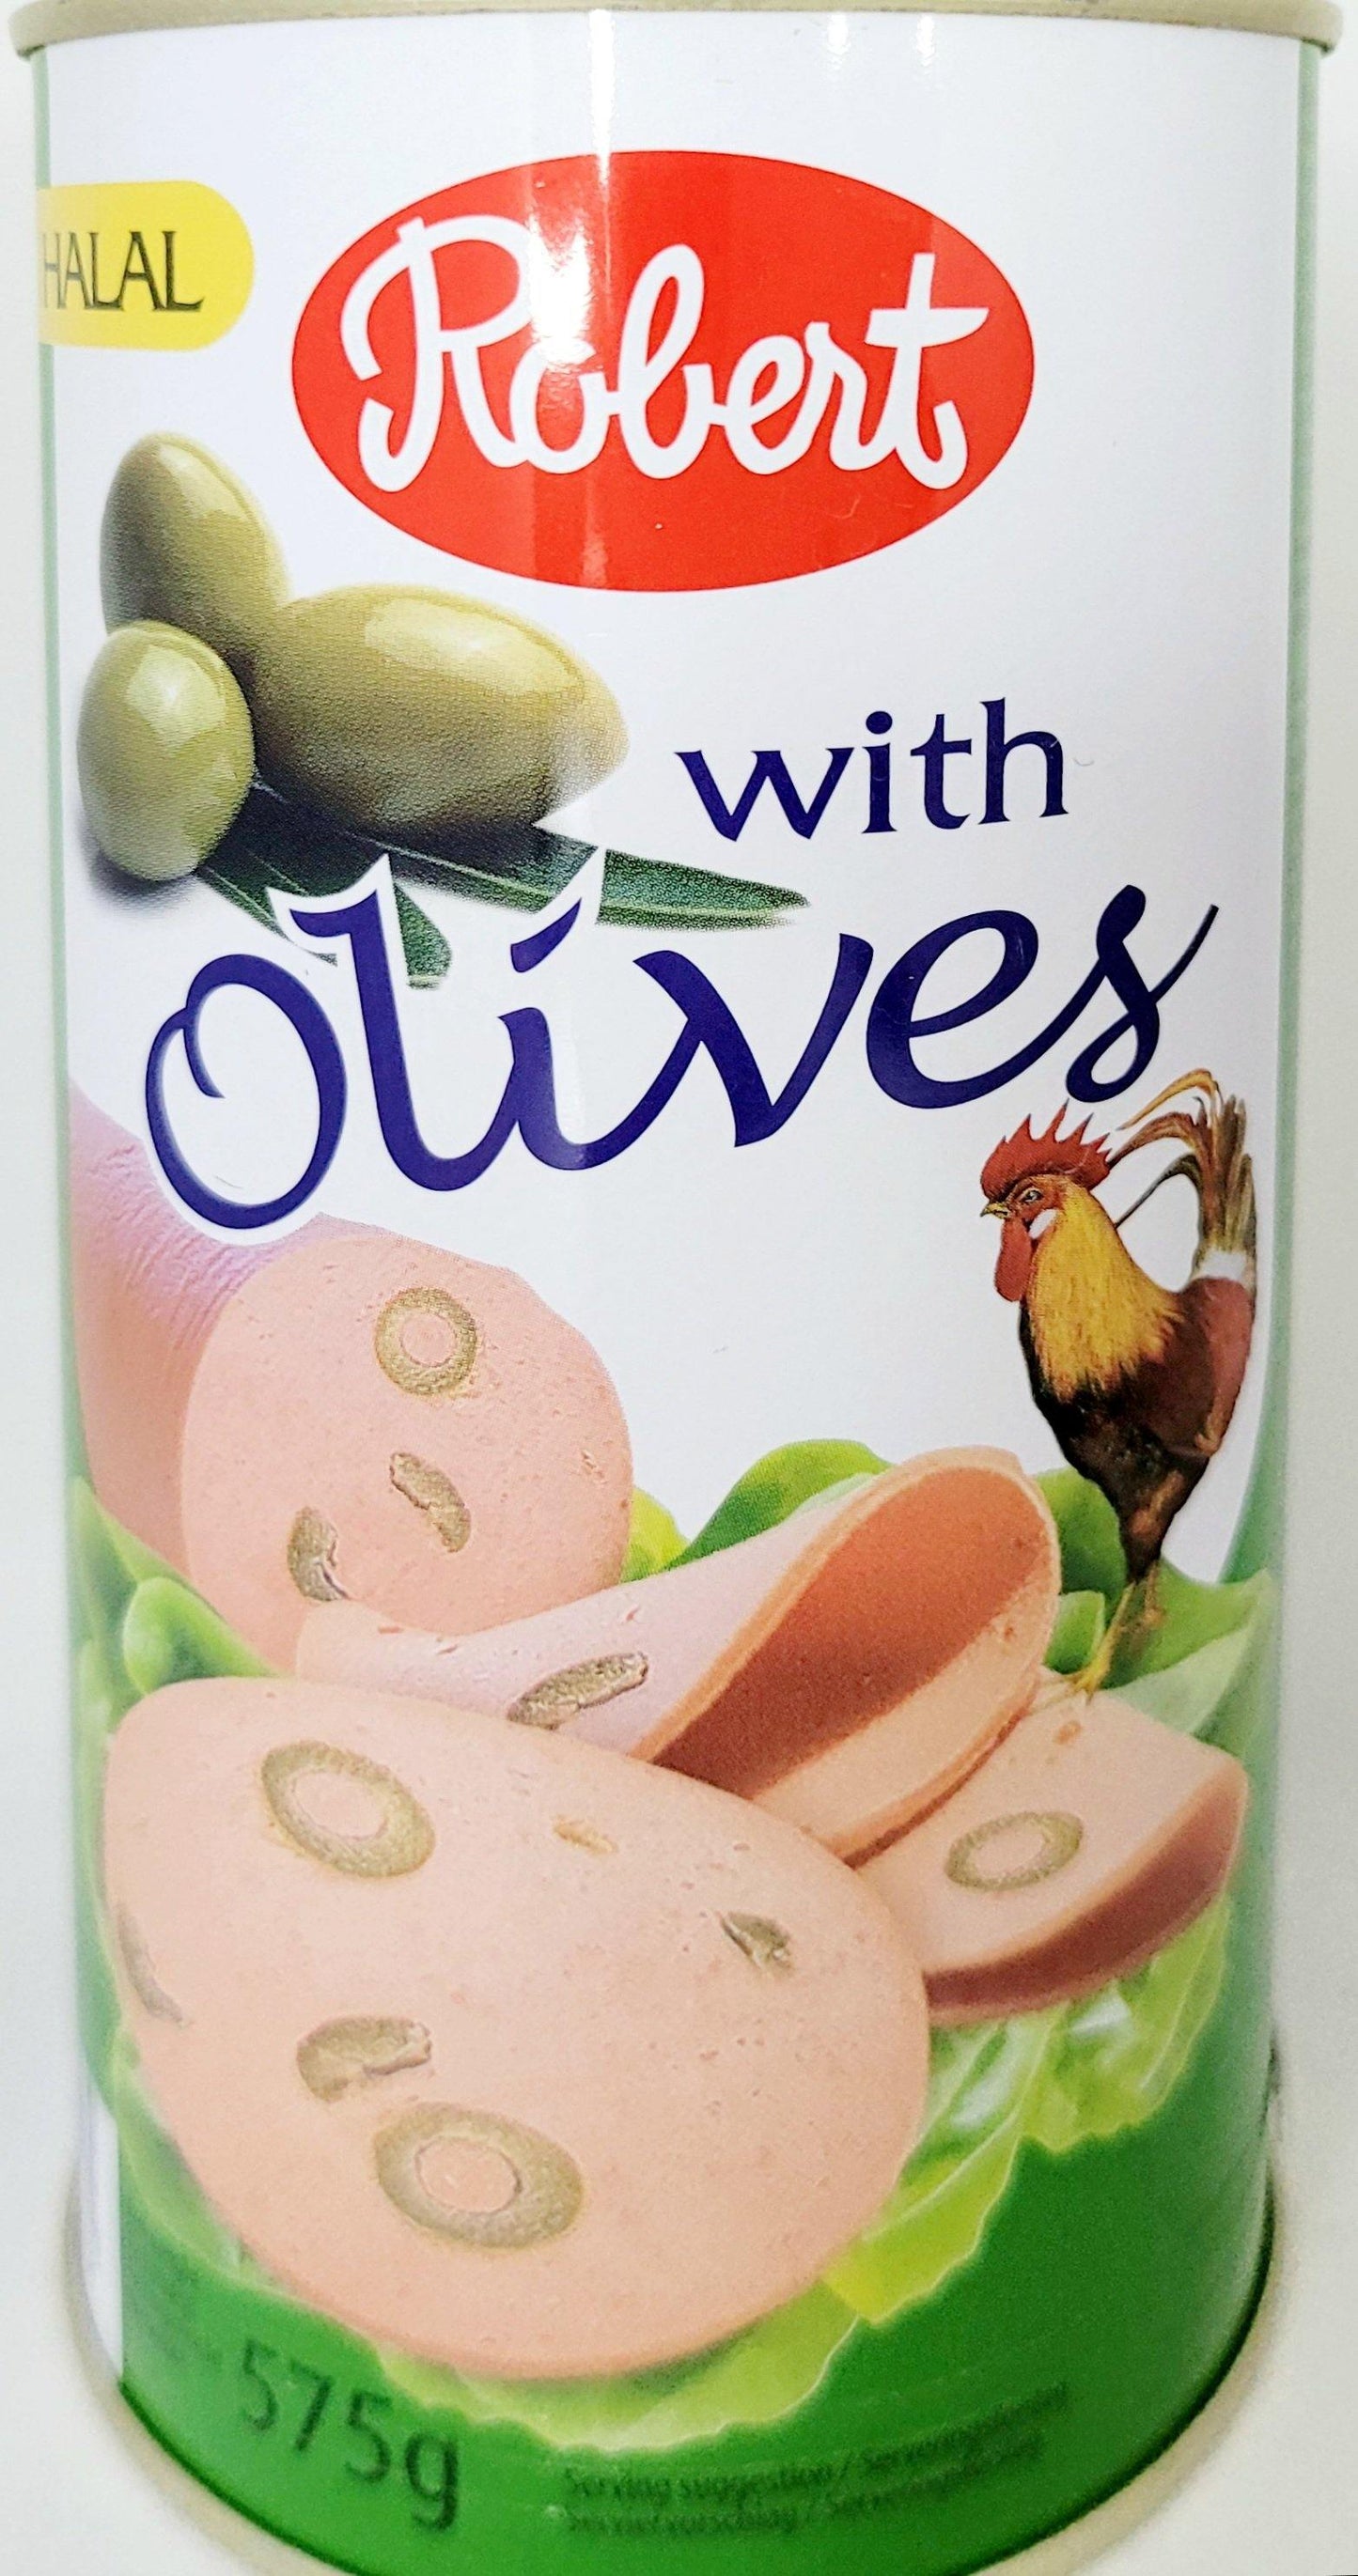 Robert Chicken Luncheon with Olives 575g - Arabian Shopping Zone